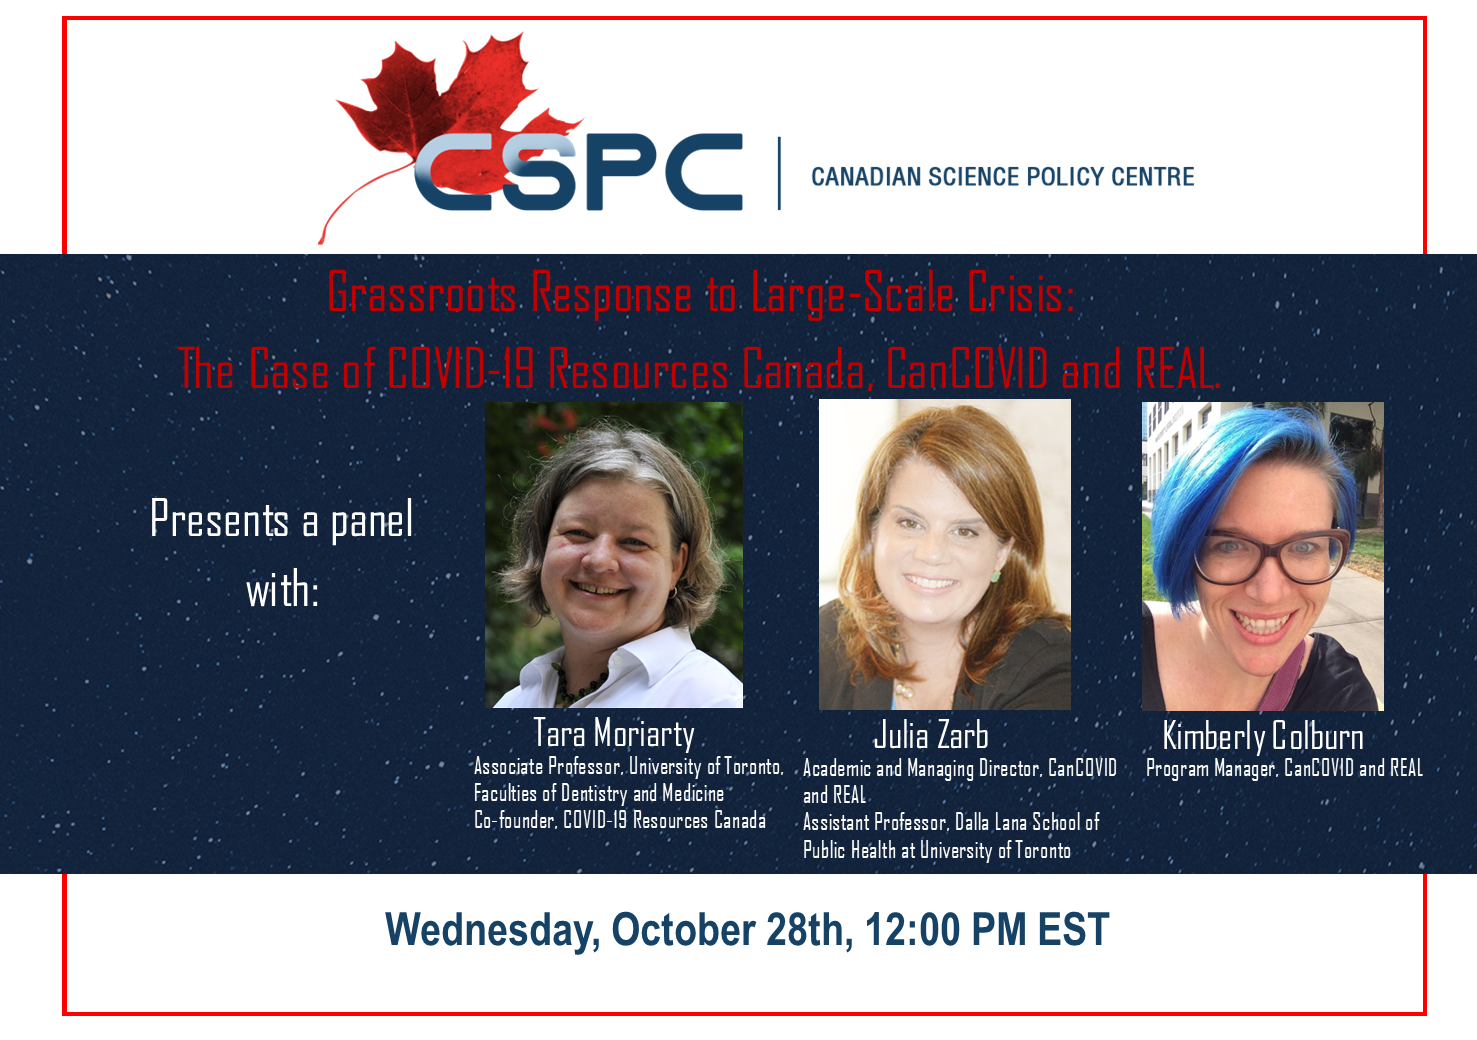 Promotional poster for the event "Grassroots Response to Large-Scale Crisis: The Case of COVID-19 Resources Canada, CanCOVID and REAL. " featuring pictures of the 3 female panelists